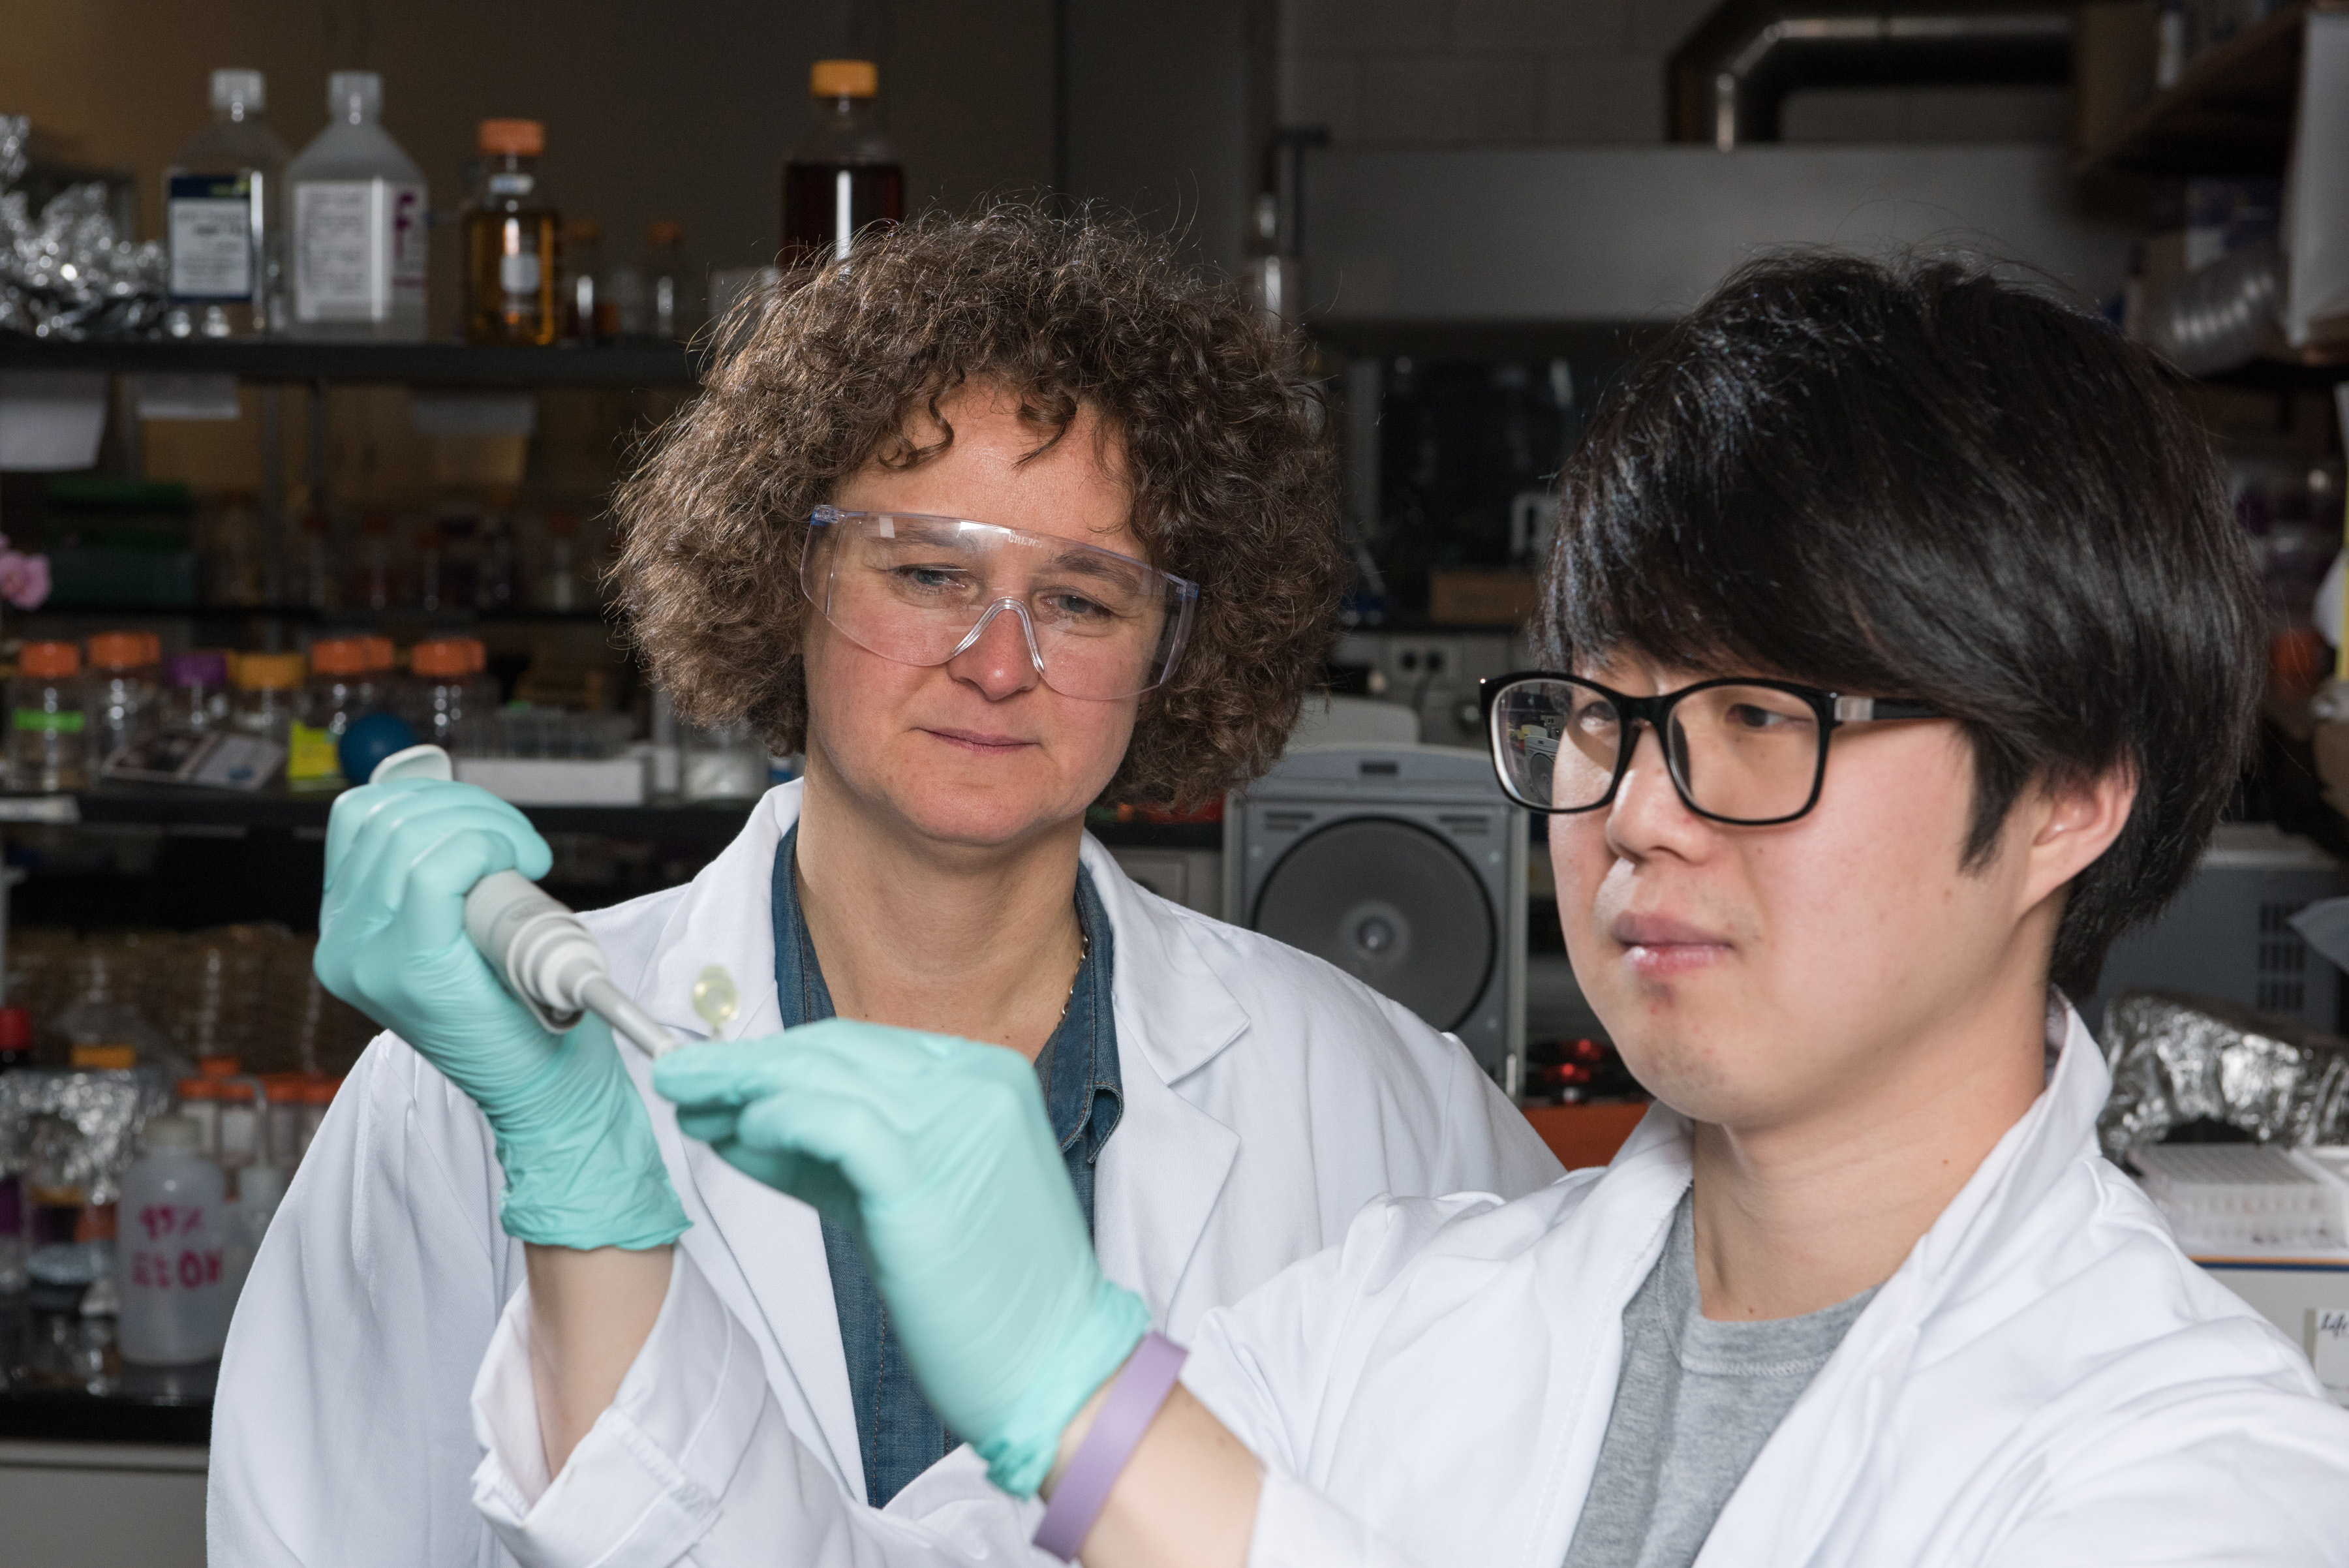 Georgia Tech Associate Professor Francesca Storici (left), Graduate Student Kyung Duk Koh and collaborators have developed and tested ribose-seq, a technique for identifying ribonucleotides in genomic DNA. (Credit: Rob Felt)